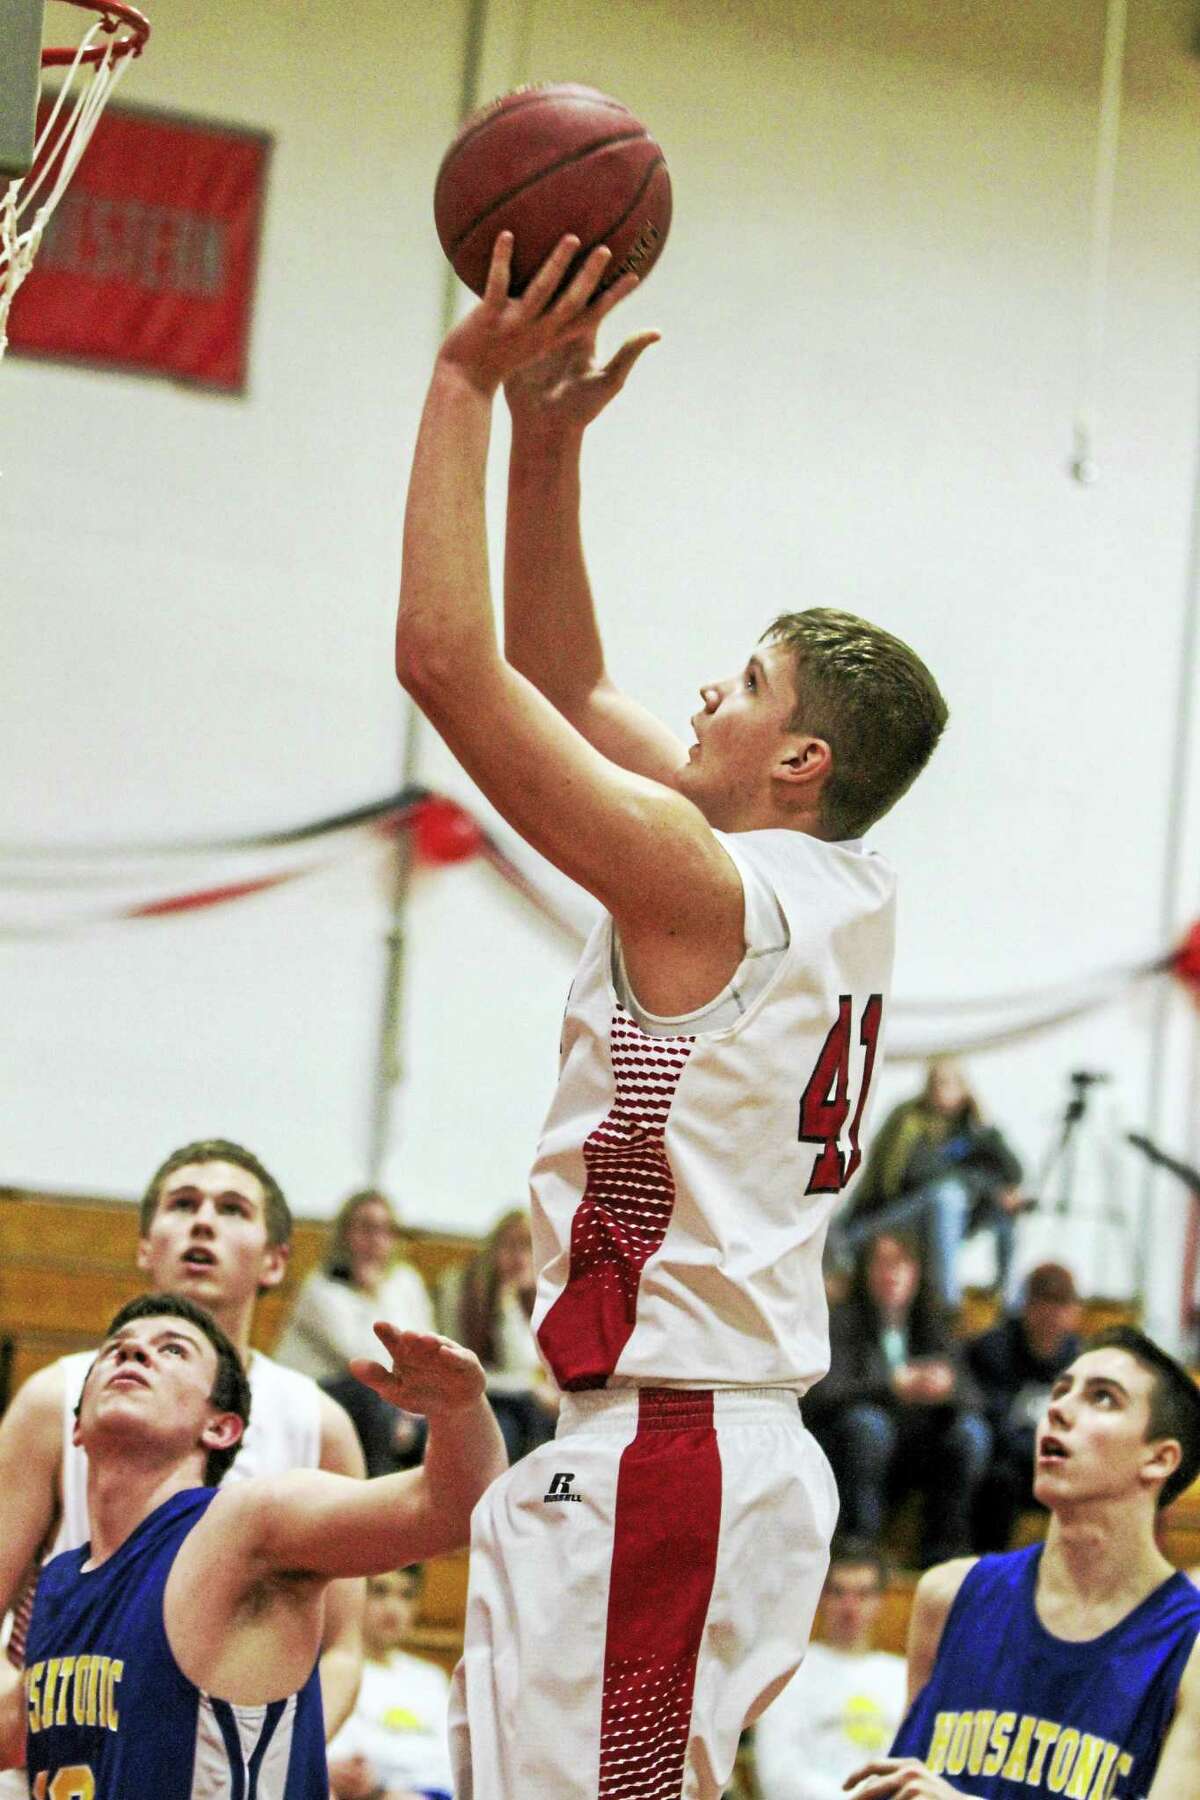 Wamogo sophomore Garrett Coe soars above the crowd for two of his 14 points against Housatonic Friday night.